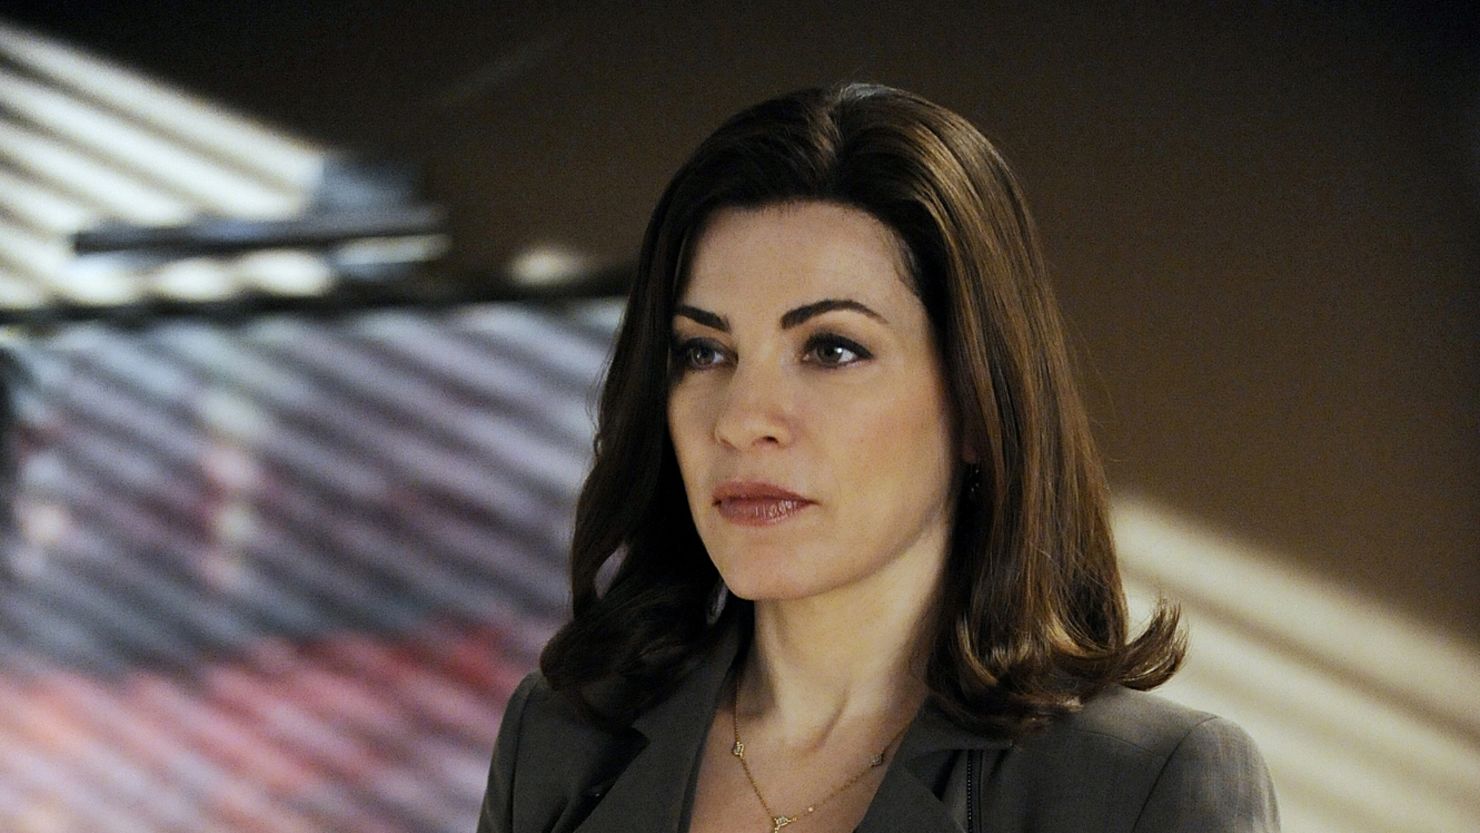 Julianna Margulies stars in "The Good Wife."